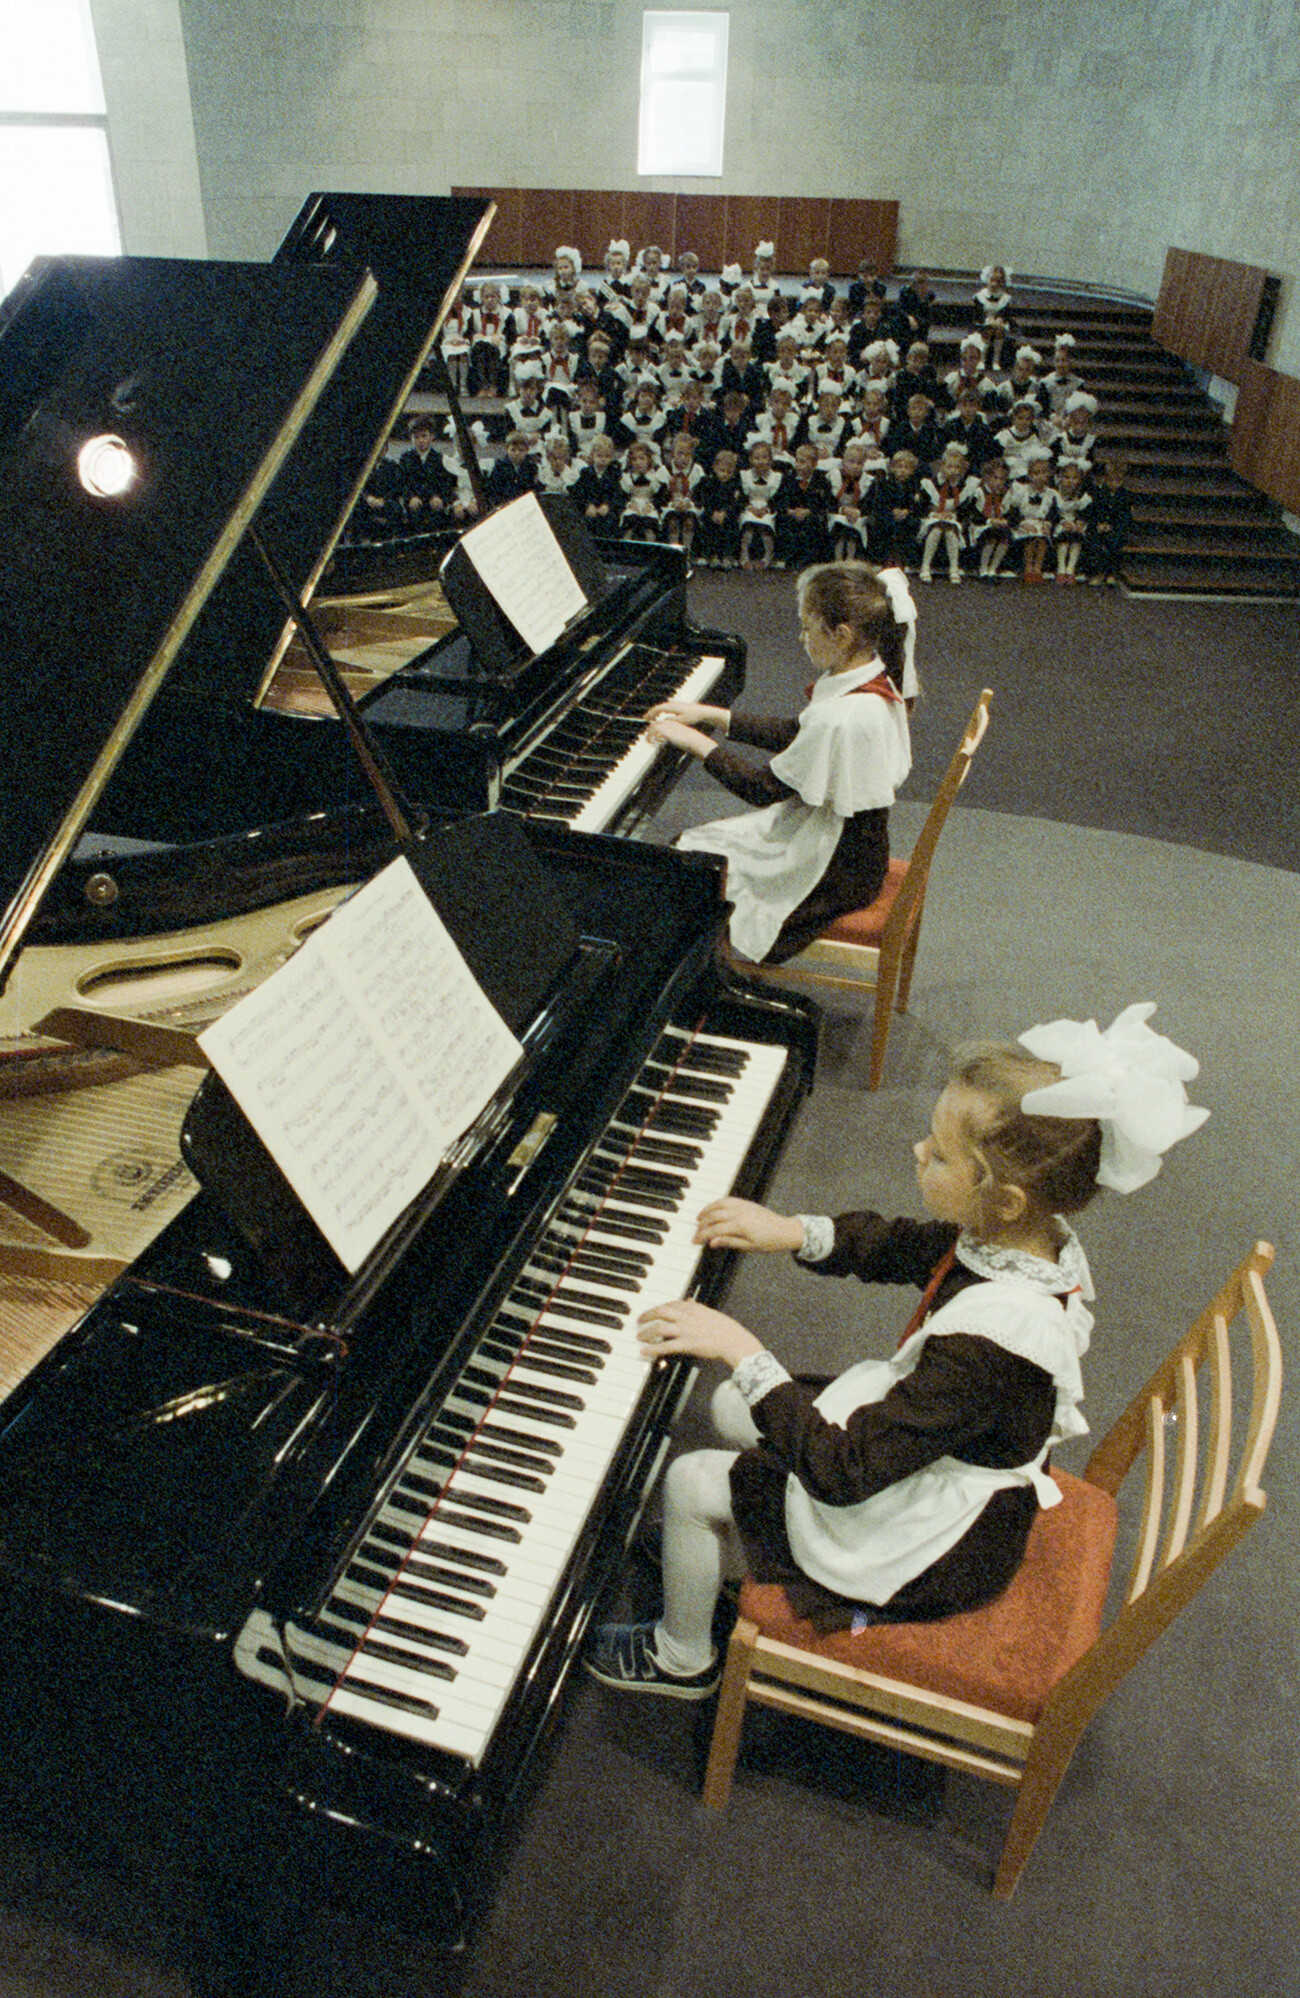 Gorky (Nizhny Novgorod now). September 30, 1988 Concert for the youngest students in the chamber hall of the school.